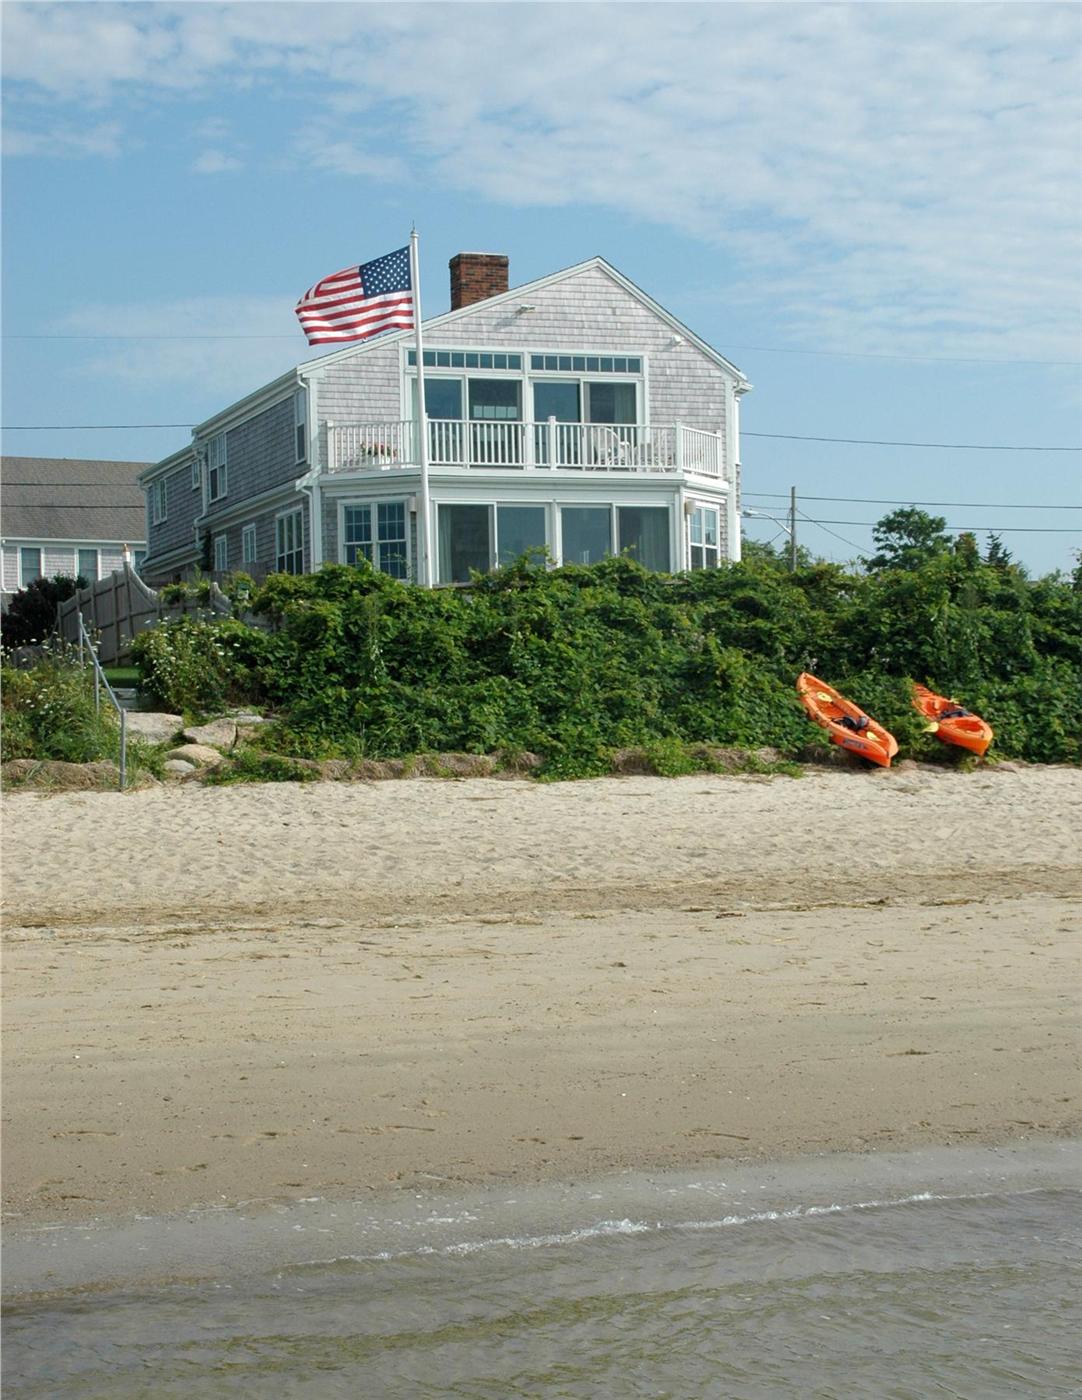 Barnstable Vacation Rental home in Cape Cod MA 02630 